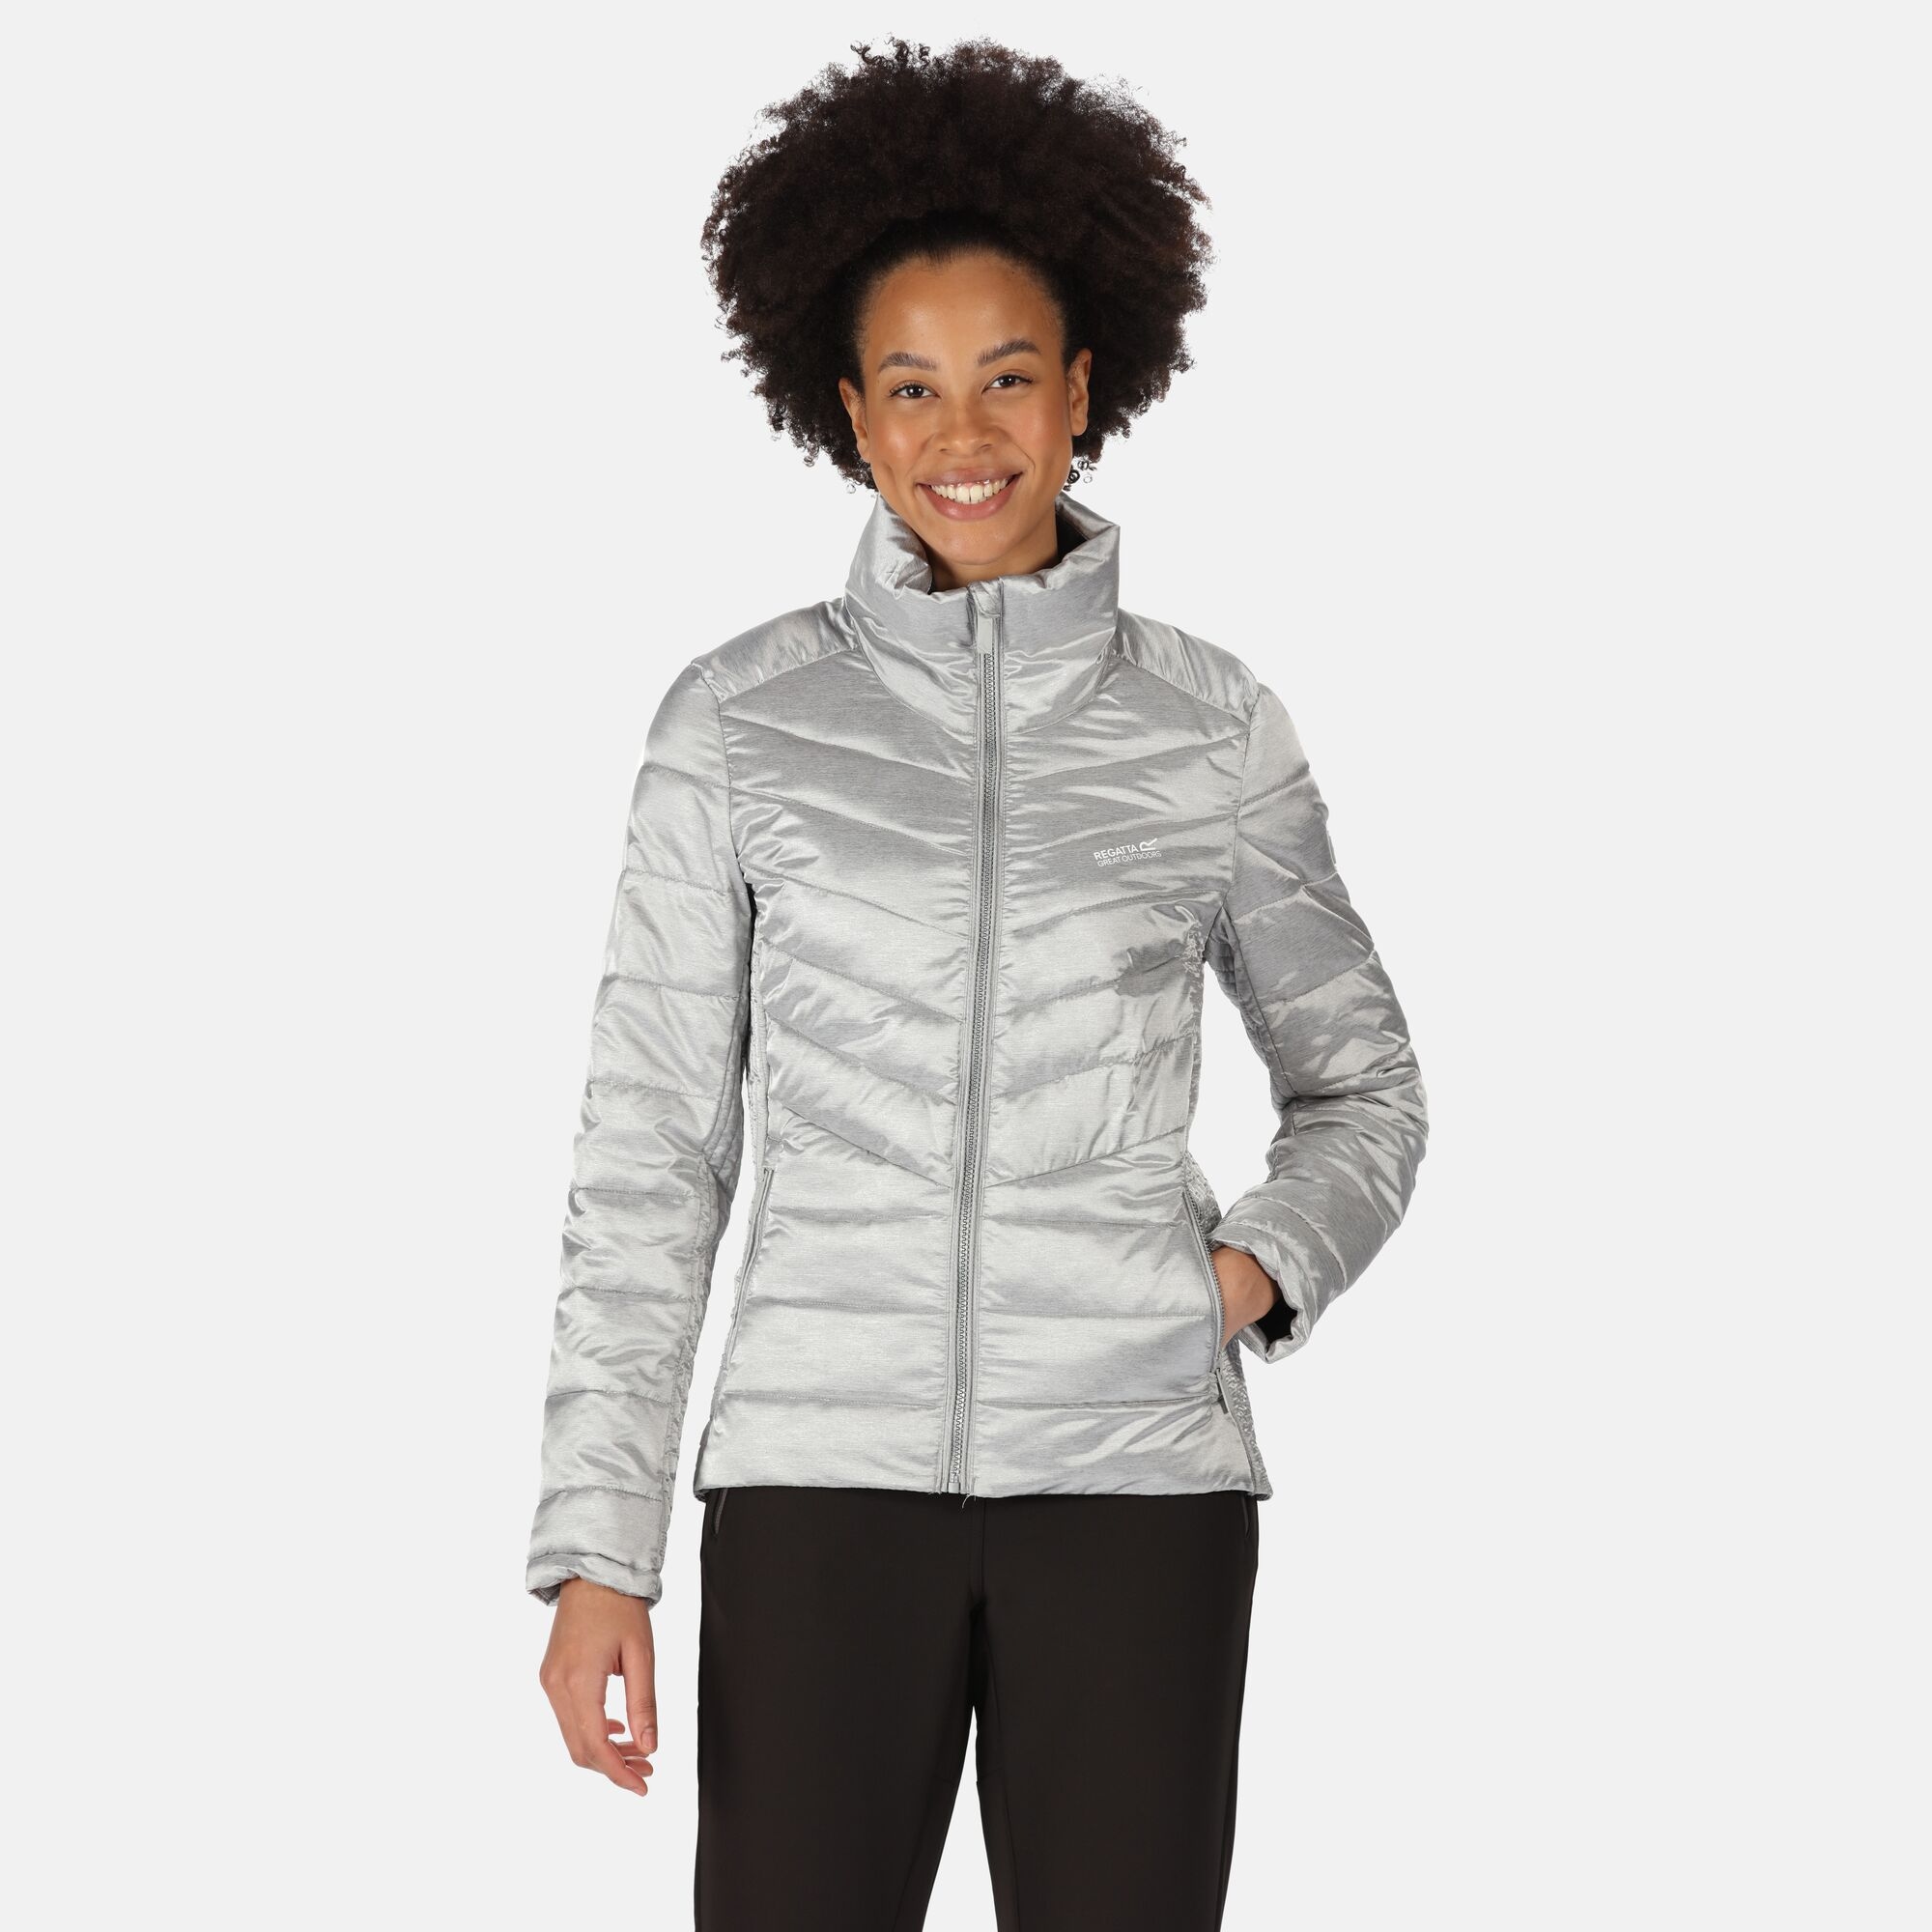 The Ororo Heated Vest Is 38% Off at Amazon